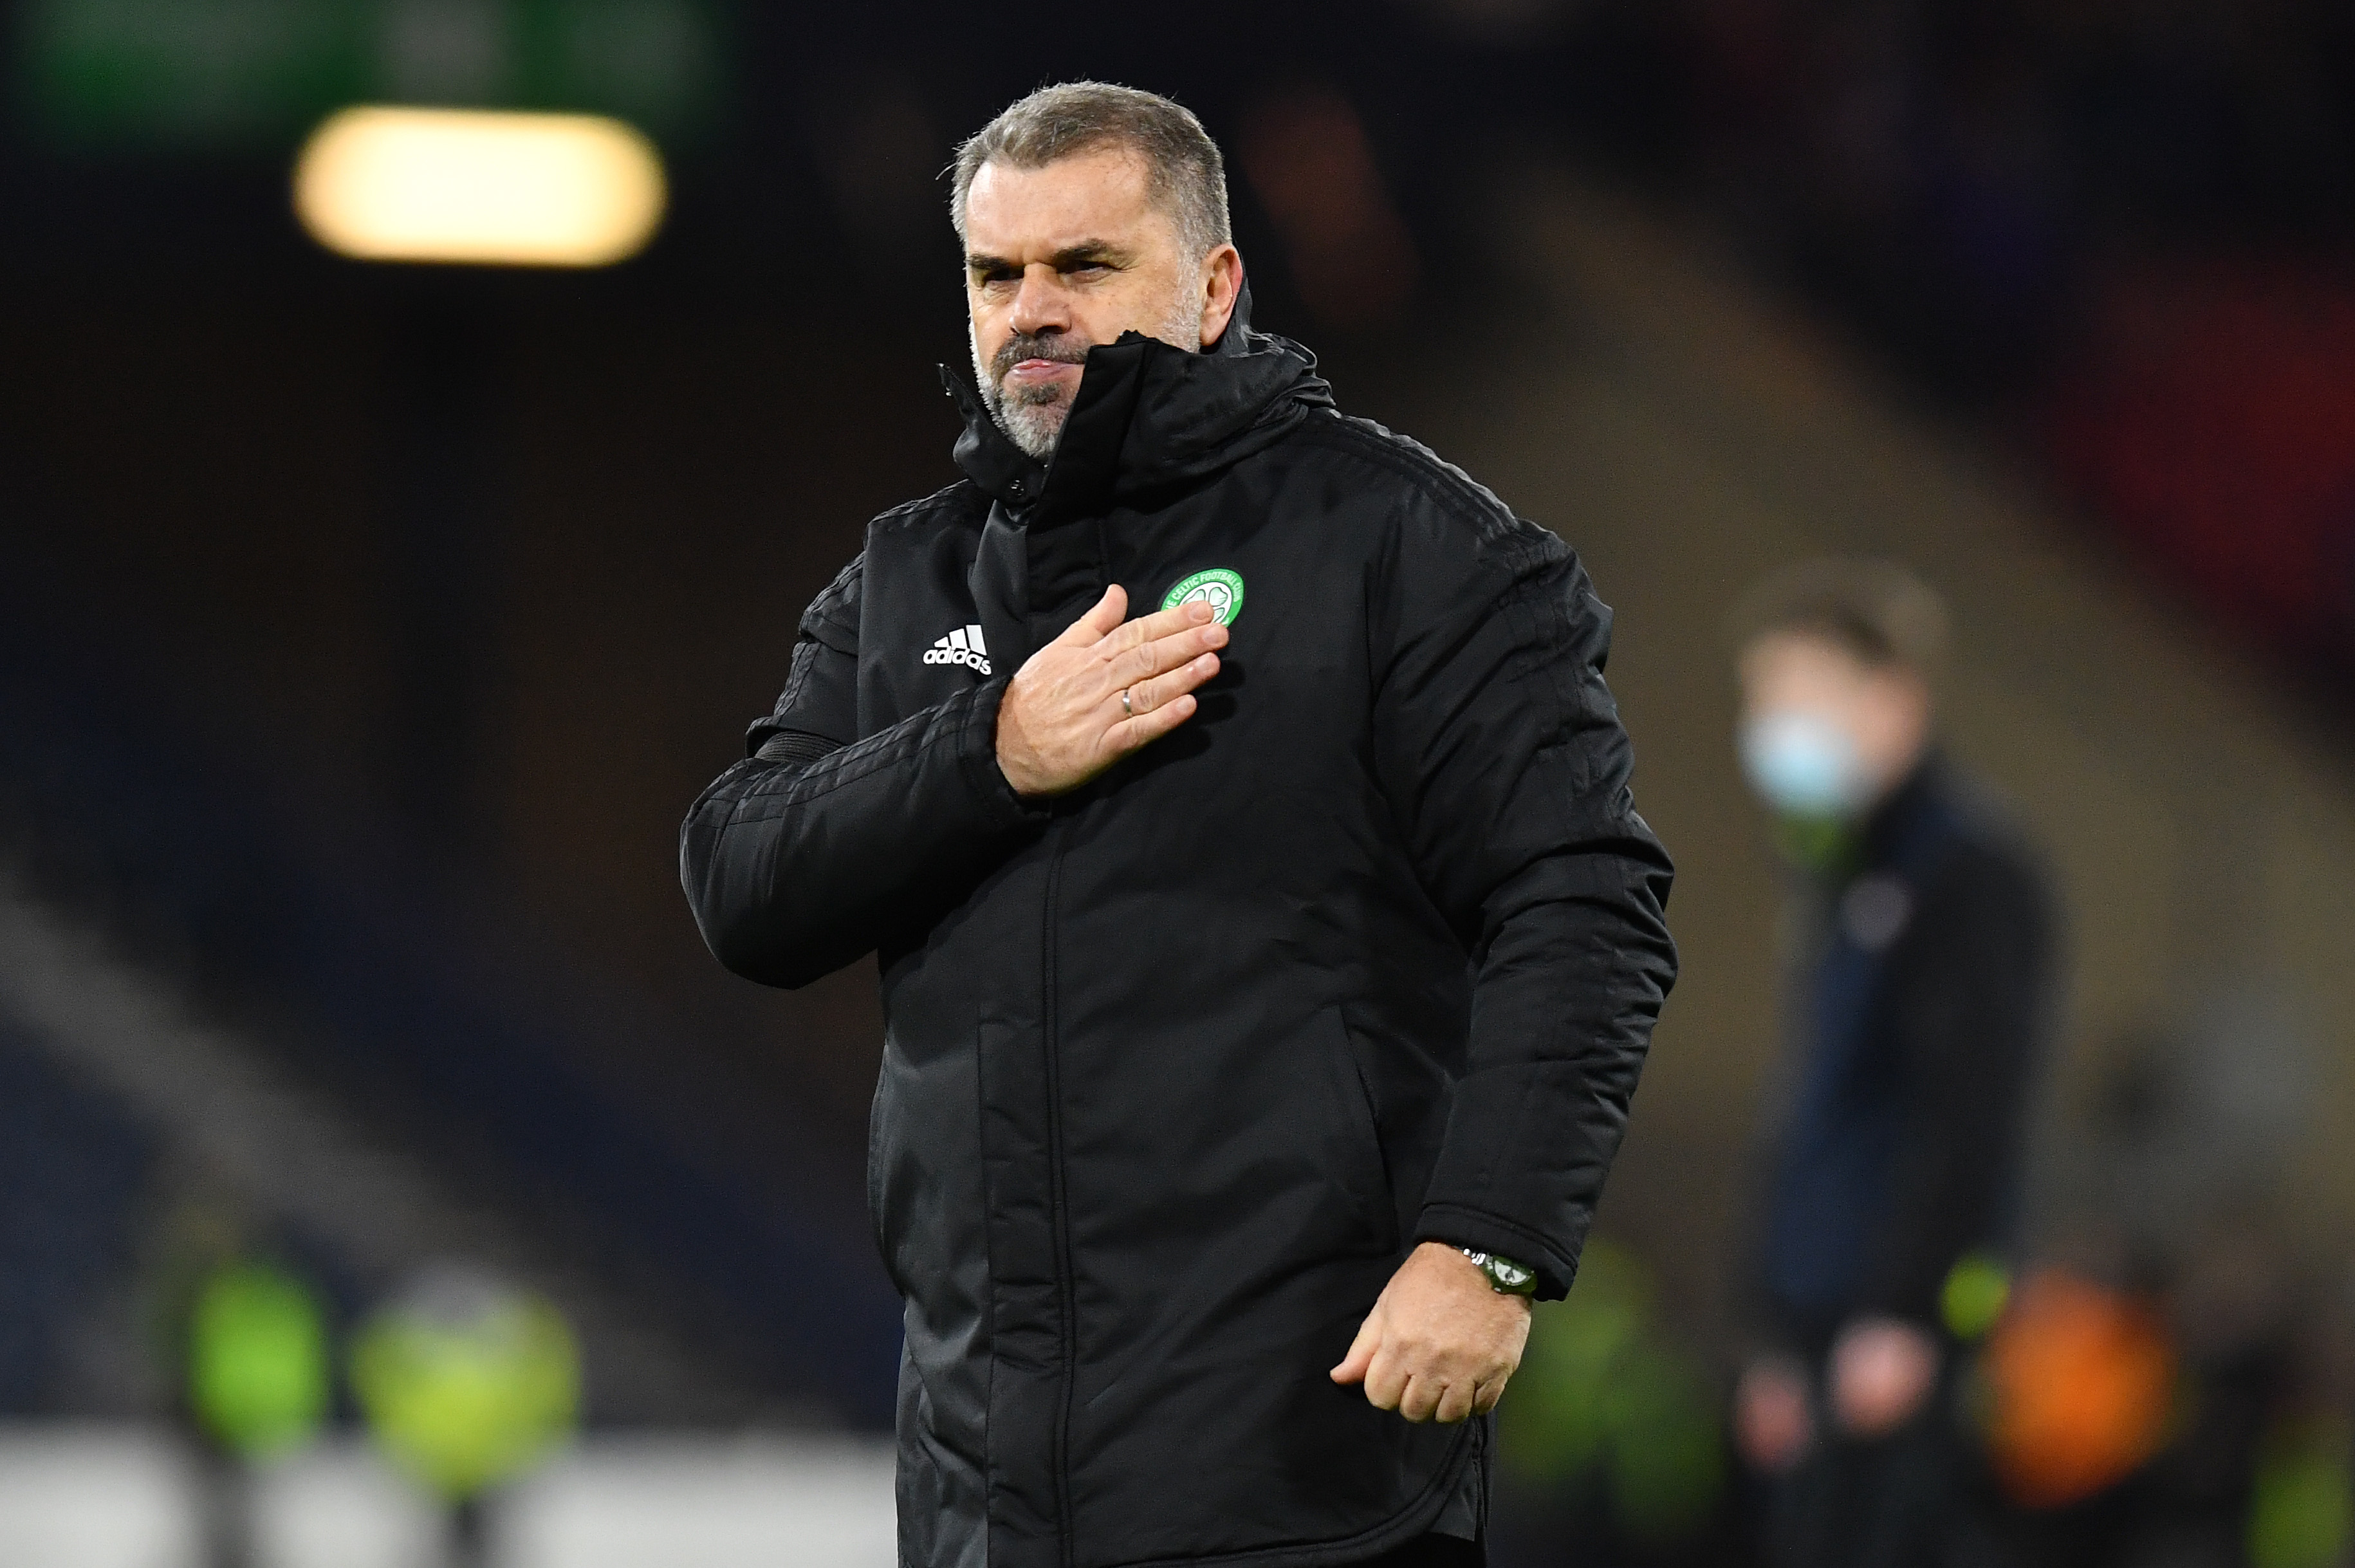 Video: “Without The Celtic Support In The Stadium There Isn't The Same  Meaning To This Football Club,” Ange Postecoglou